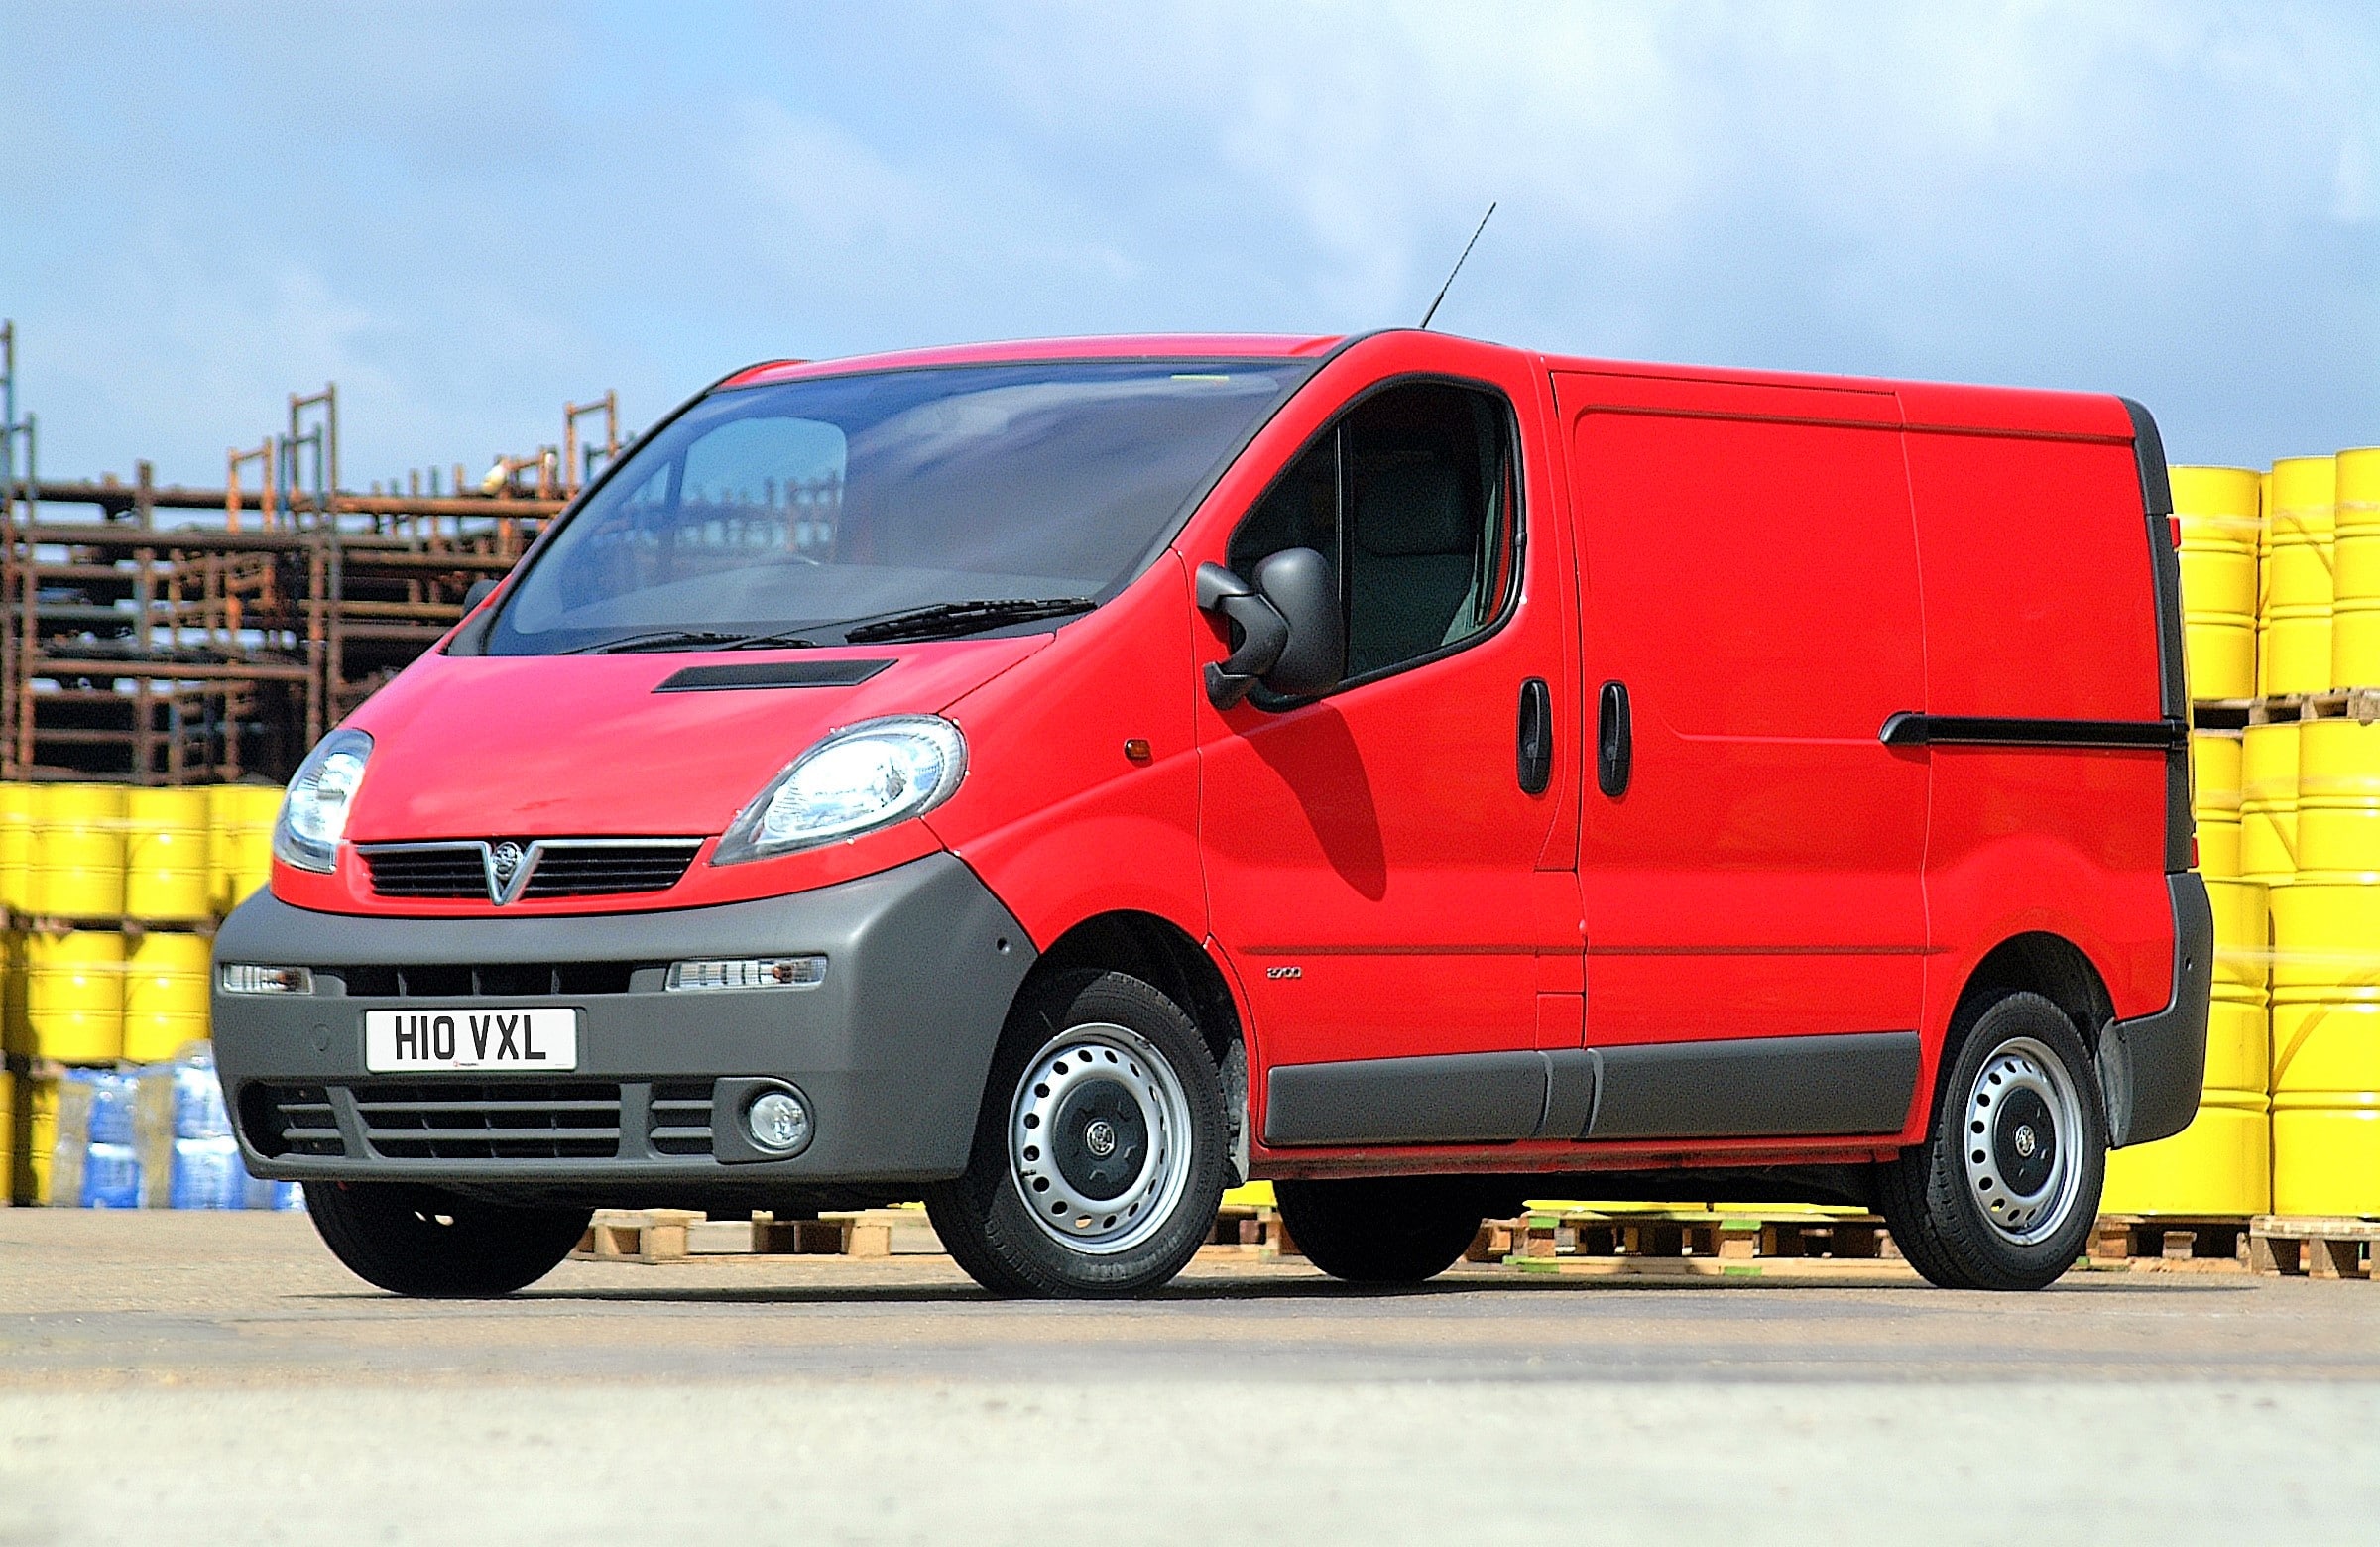 Vauxhall's Vivaro van is markedly more car-related than it appears